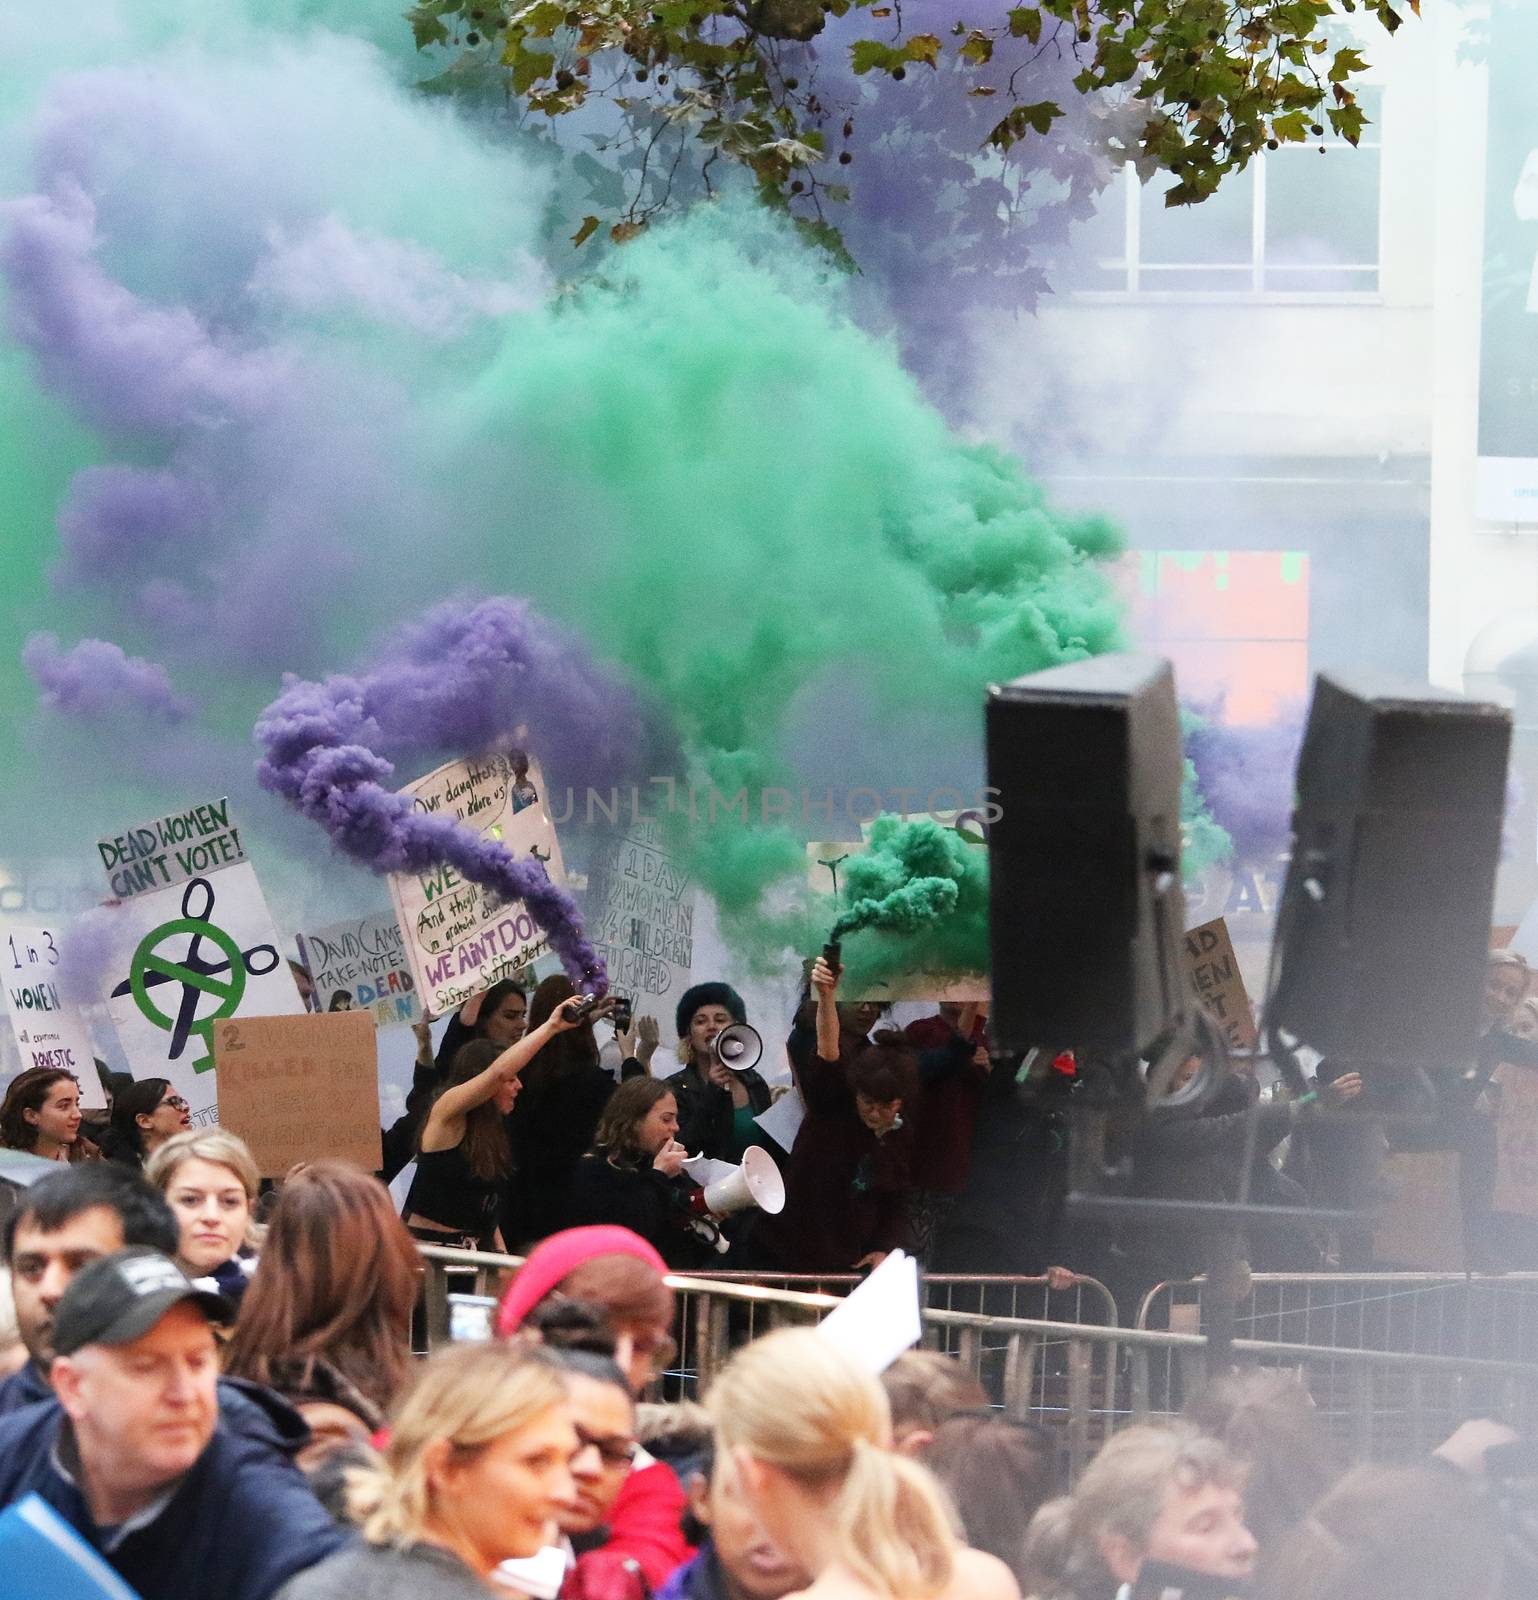 UNITED KINGDOM, London: Feminist protesters hold posters and release green and purple smoke bombs to highlight cuts to domestic violence services during the screening of Suffragette on opening night of the BFI London Film Festival at London's Odeon Leicester Square on October 7, 2015. 